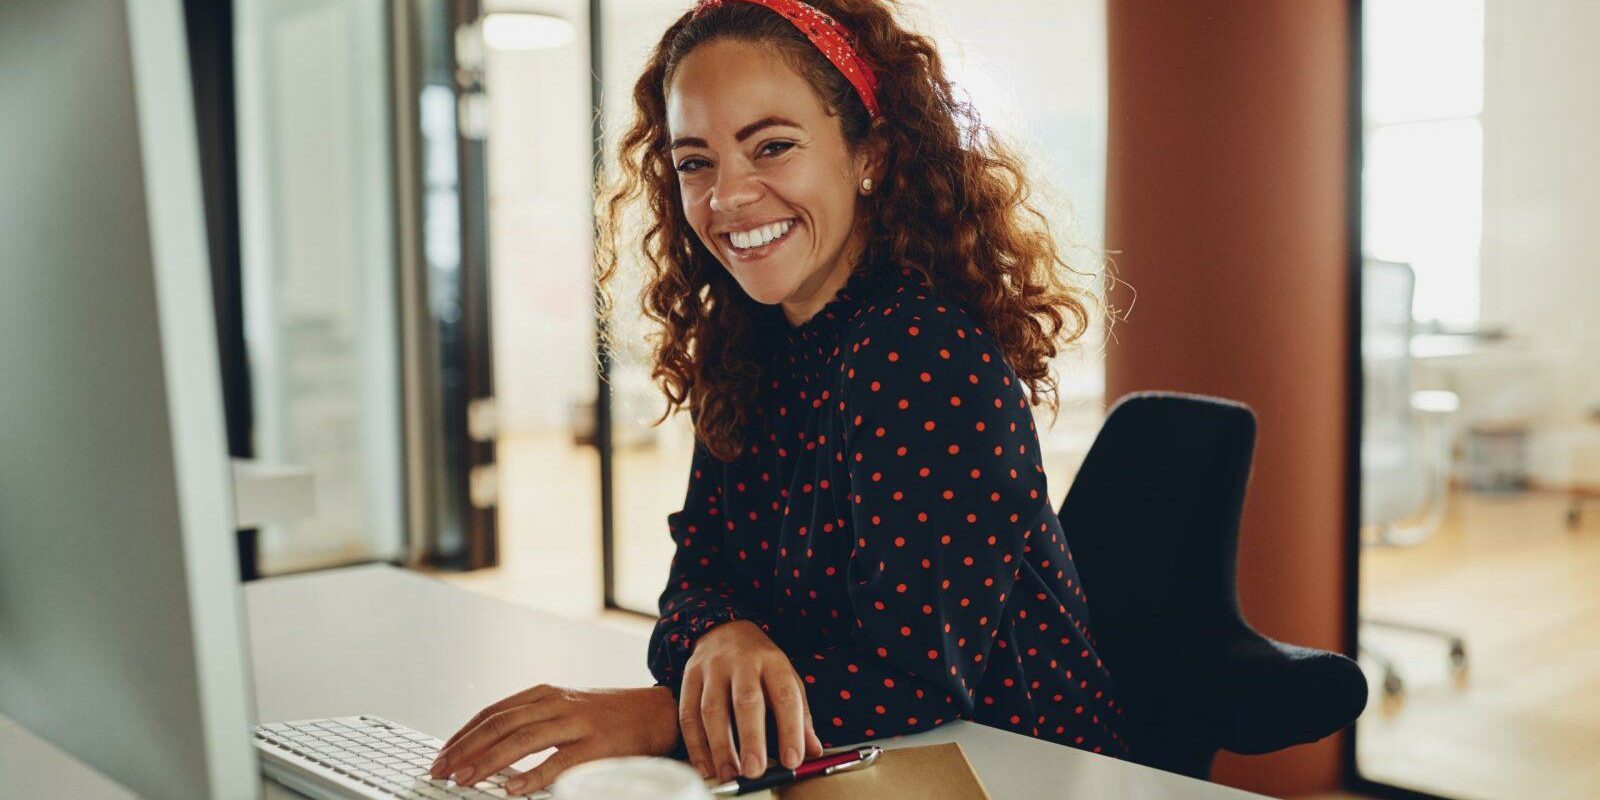 Young businesswoman sitting at her desk and smiling while working on a computer and taking notes